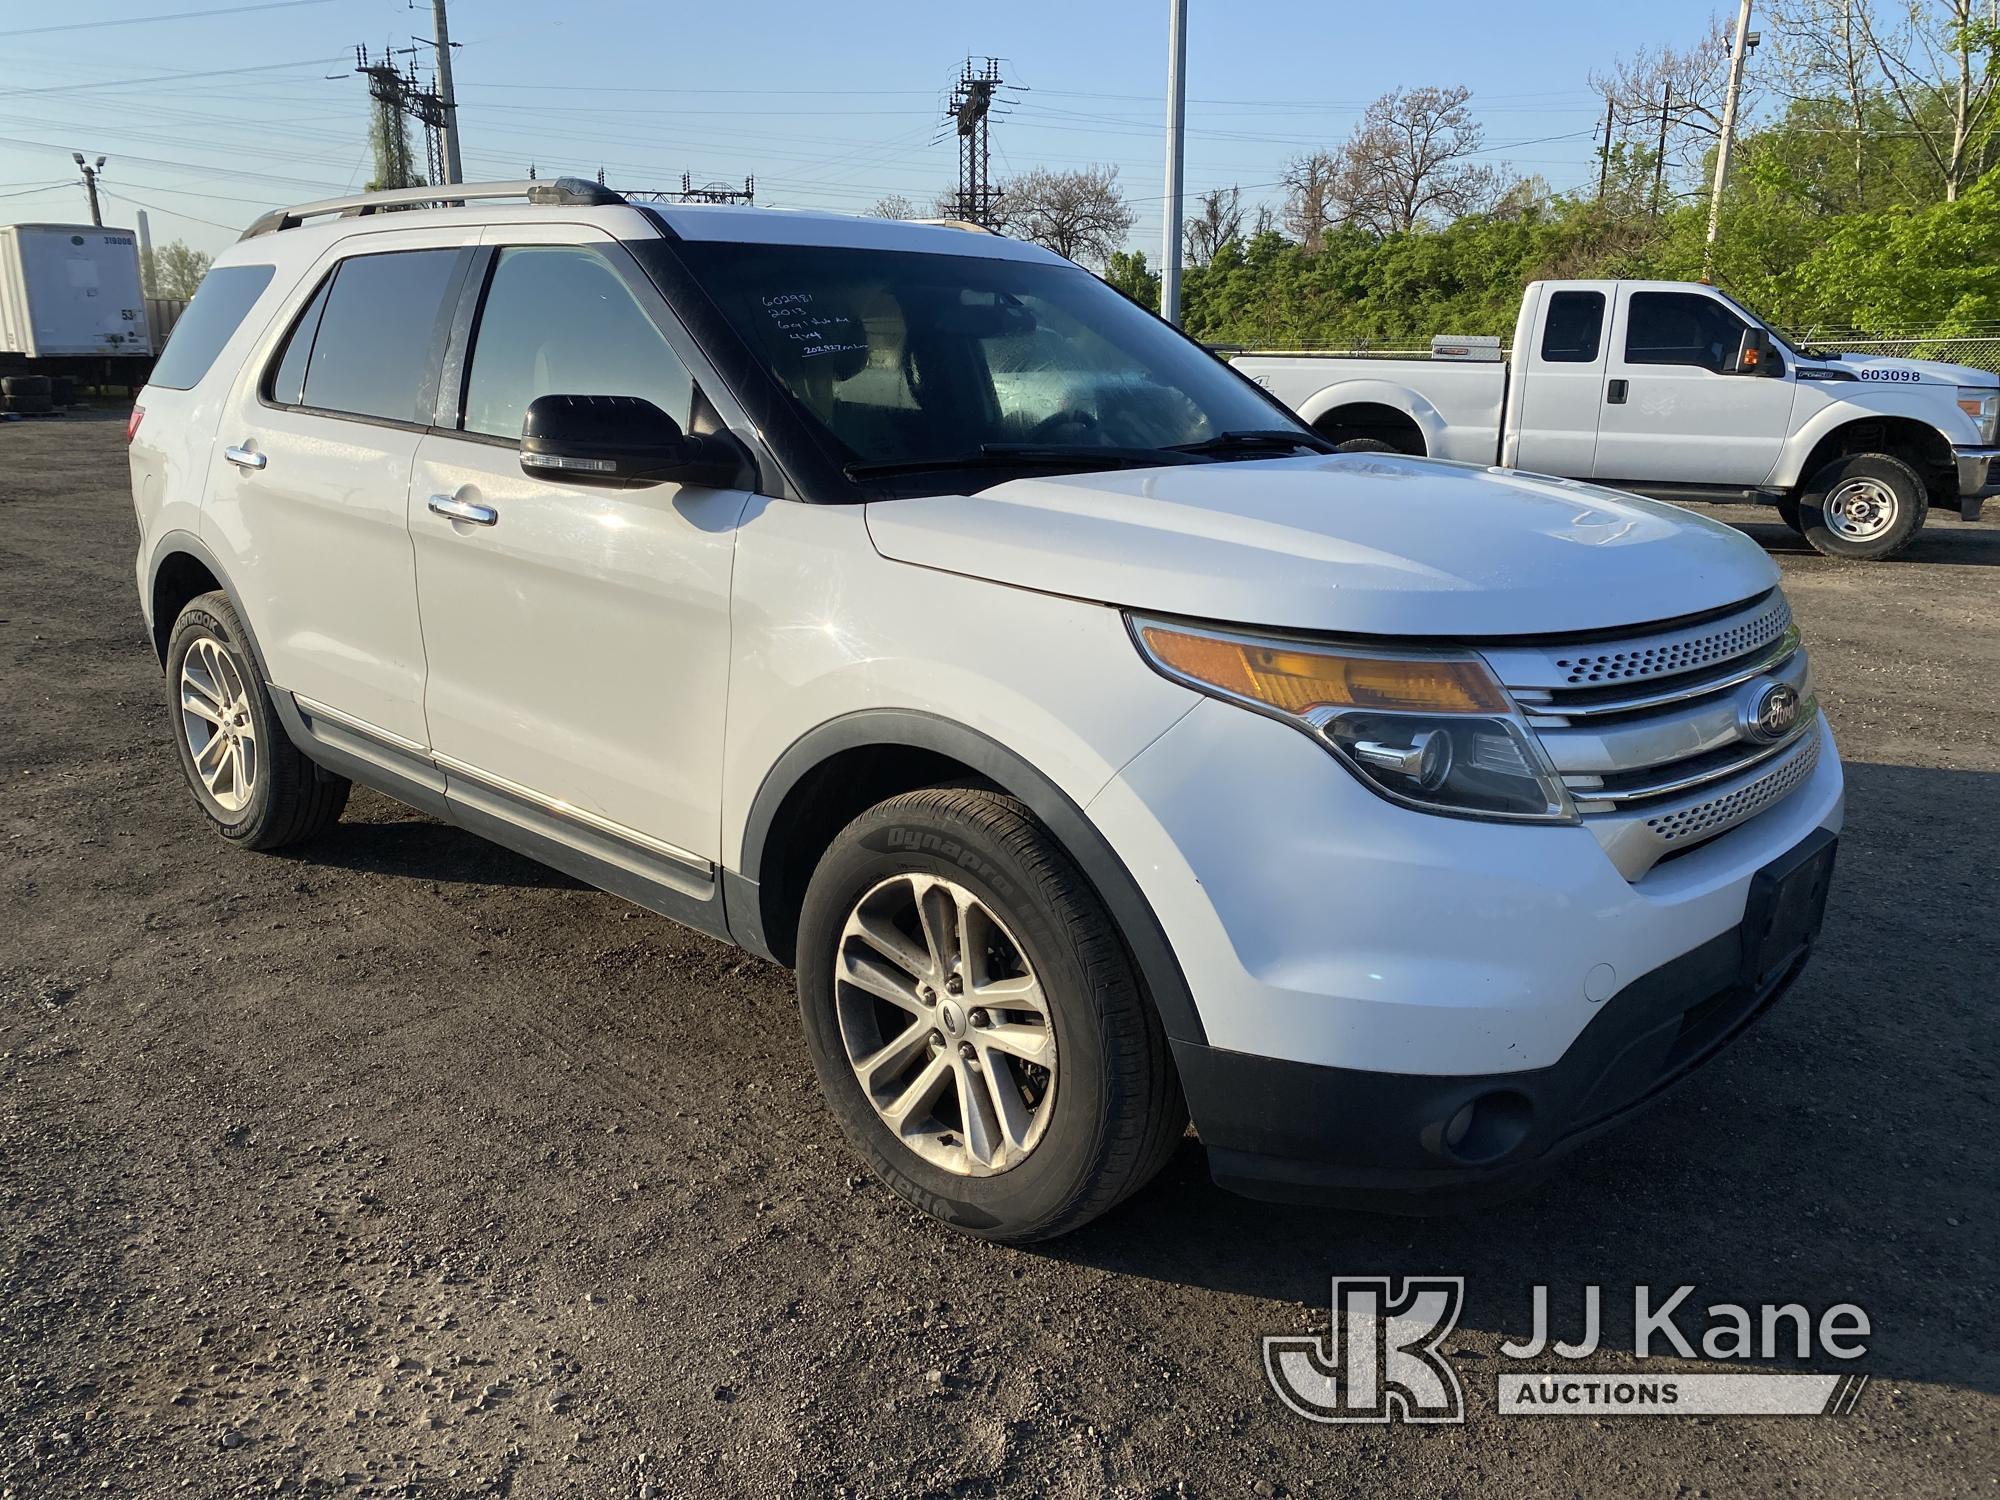 (Plymouth Meeting, PA) 2013 Ford Explorer 4x4 4-Door Sport Utility Vehicle Runs & Moves, Body & Rust